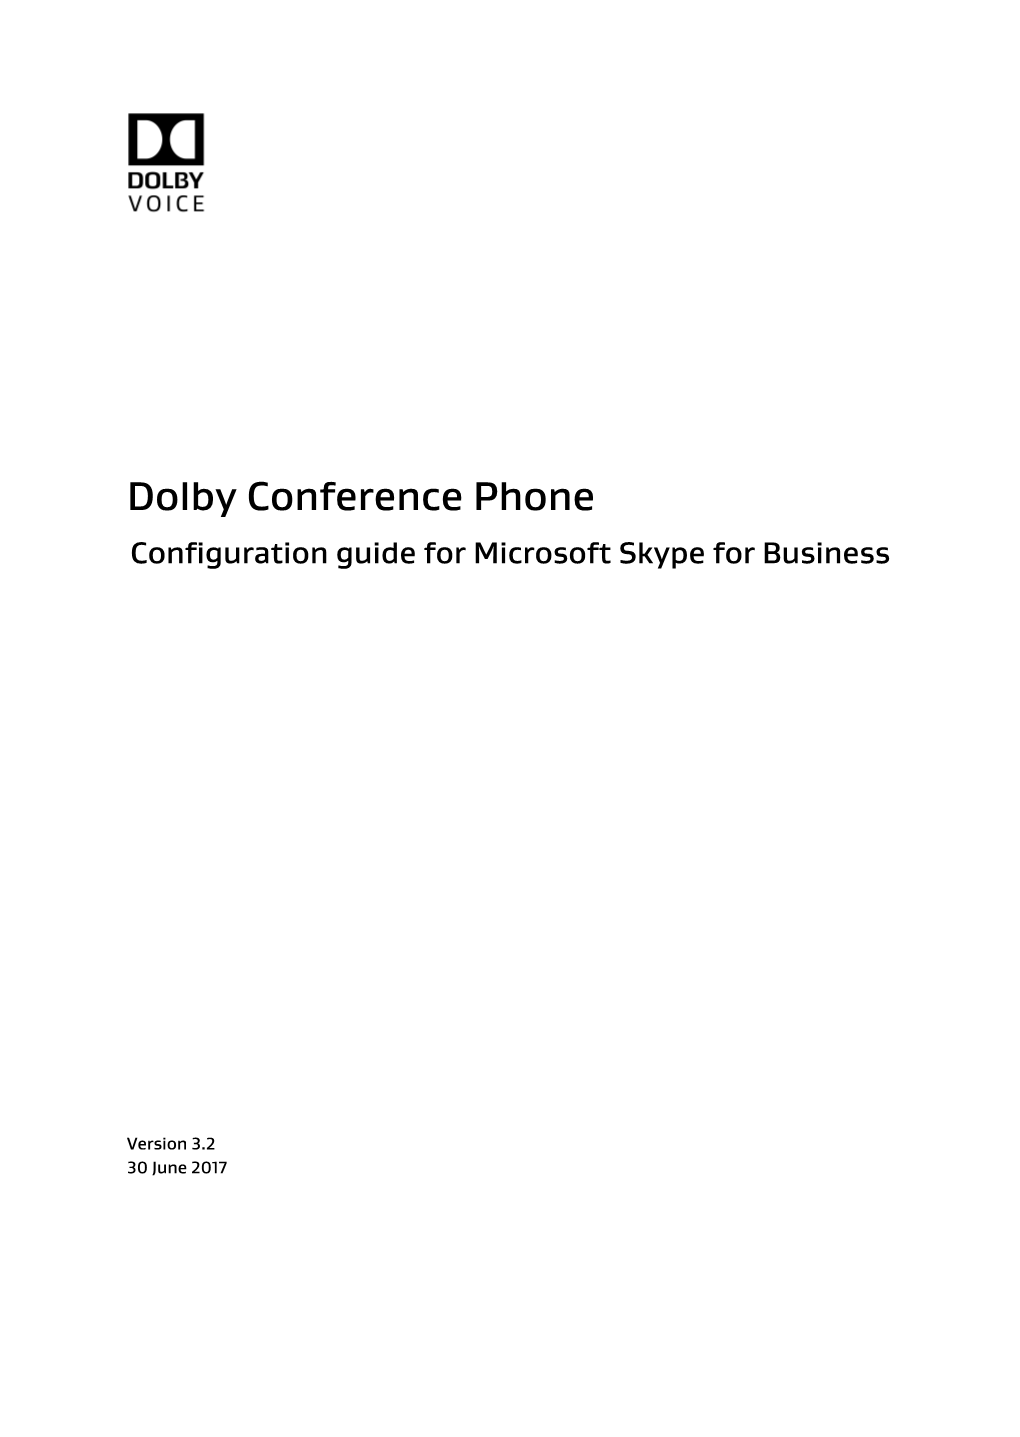 Dolby Conference Phone Configuration Guide for Microsoft Skype for Business